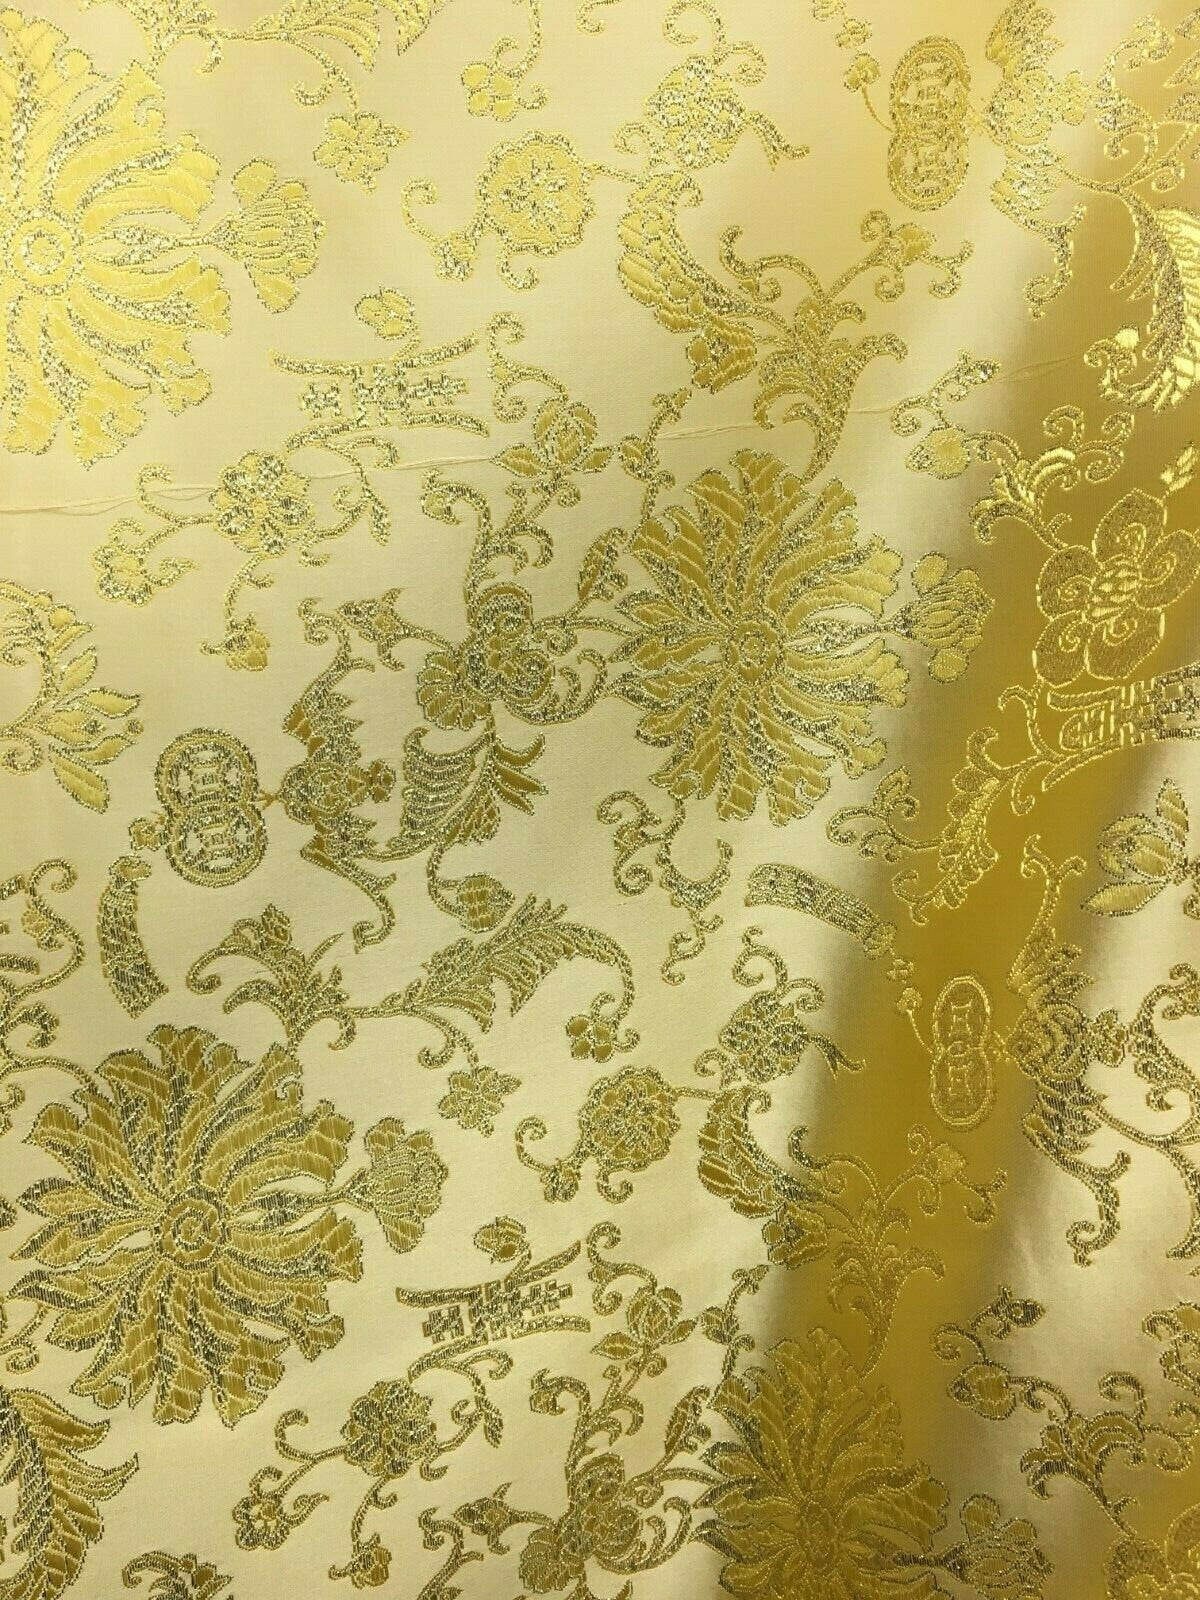 GOLD Metallic Floral Brocade Fabric (56 in.) Sold By The Yard